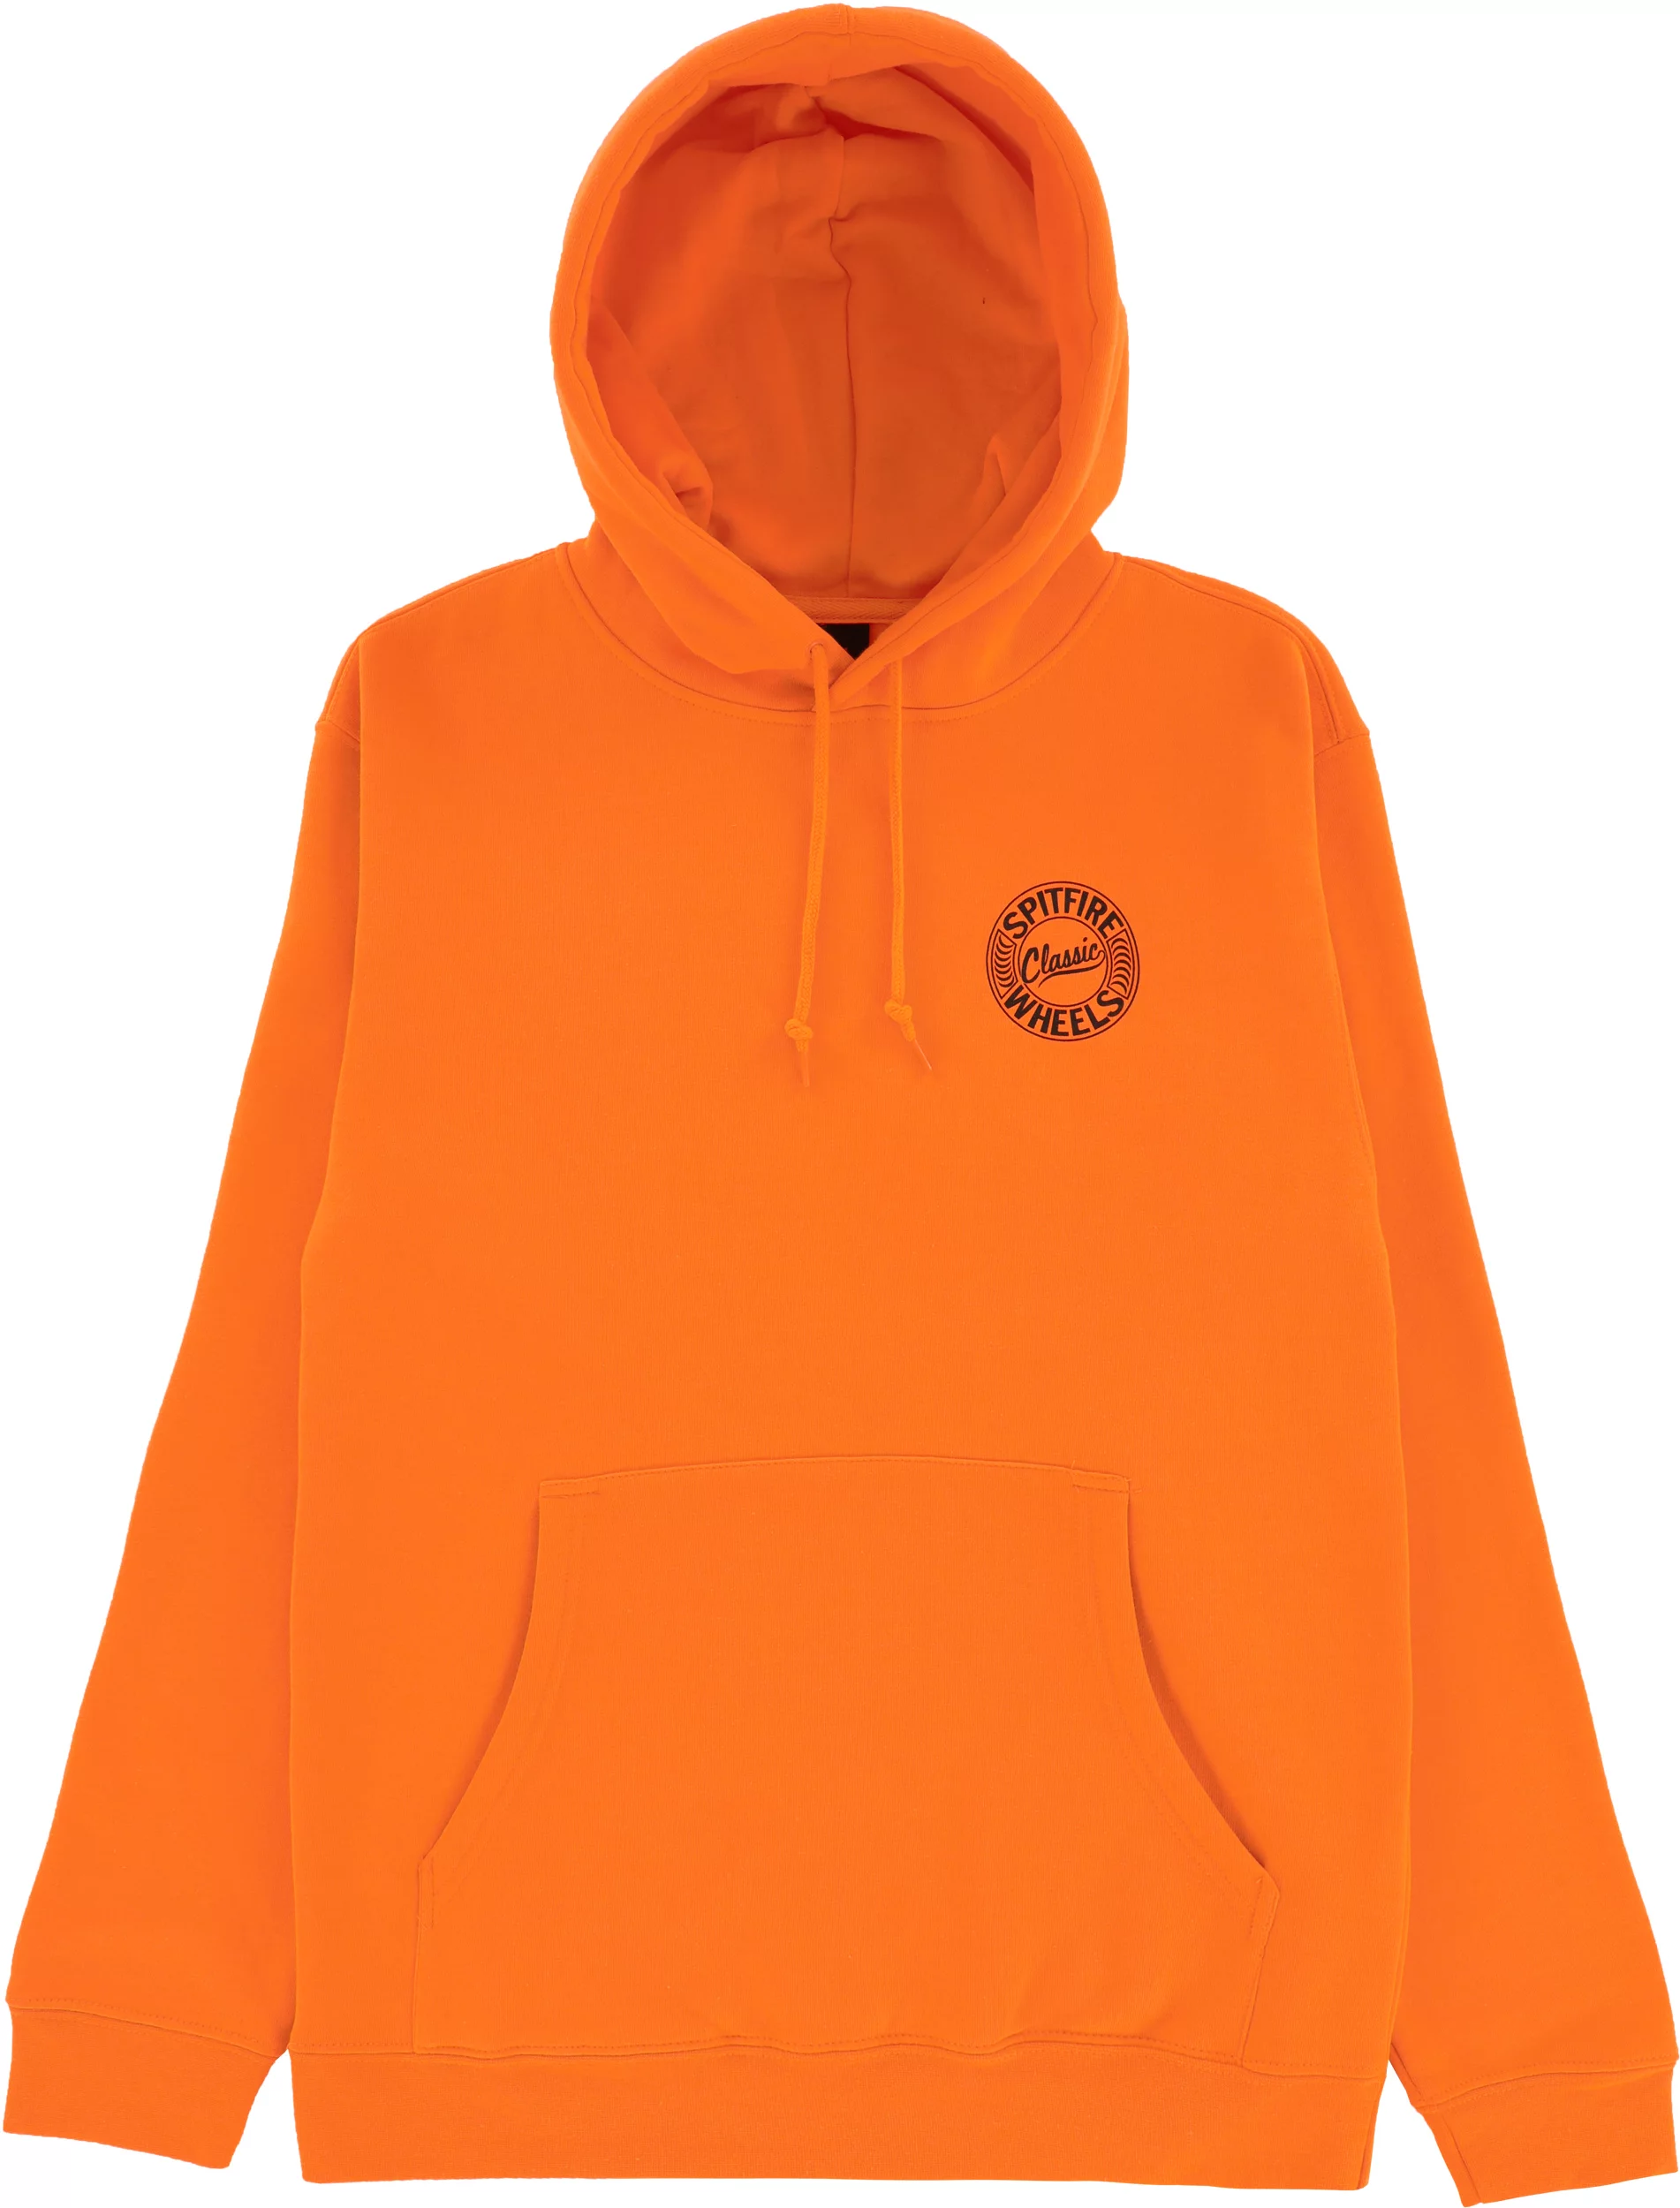 Spitfire Flying Classic Neon Hoodie - safety orange | Tactics